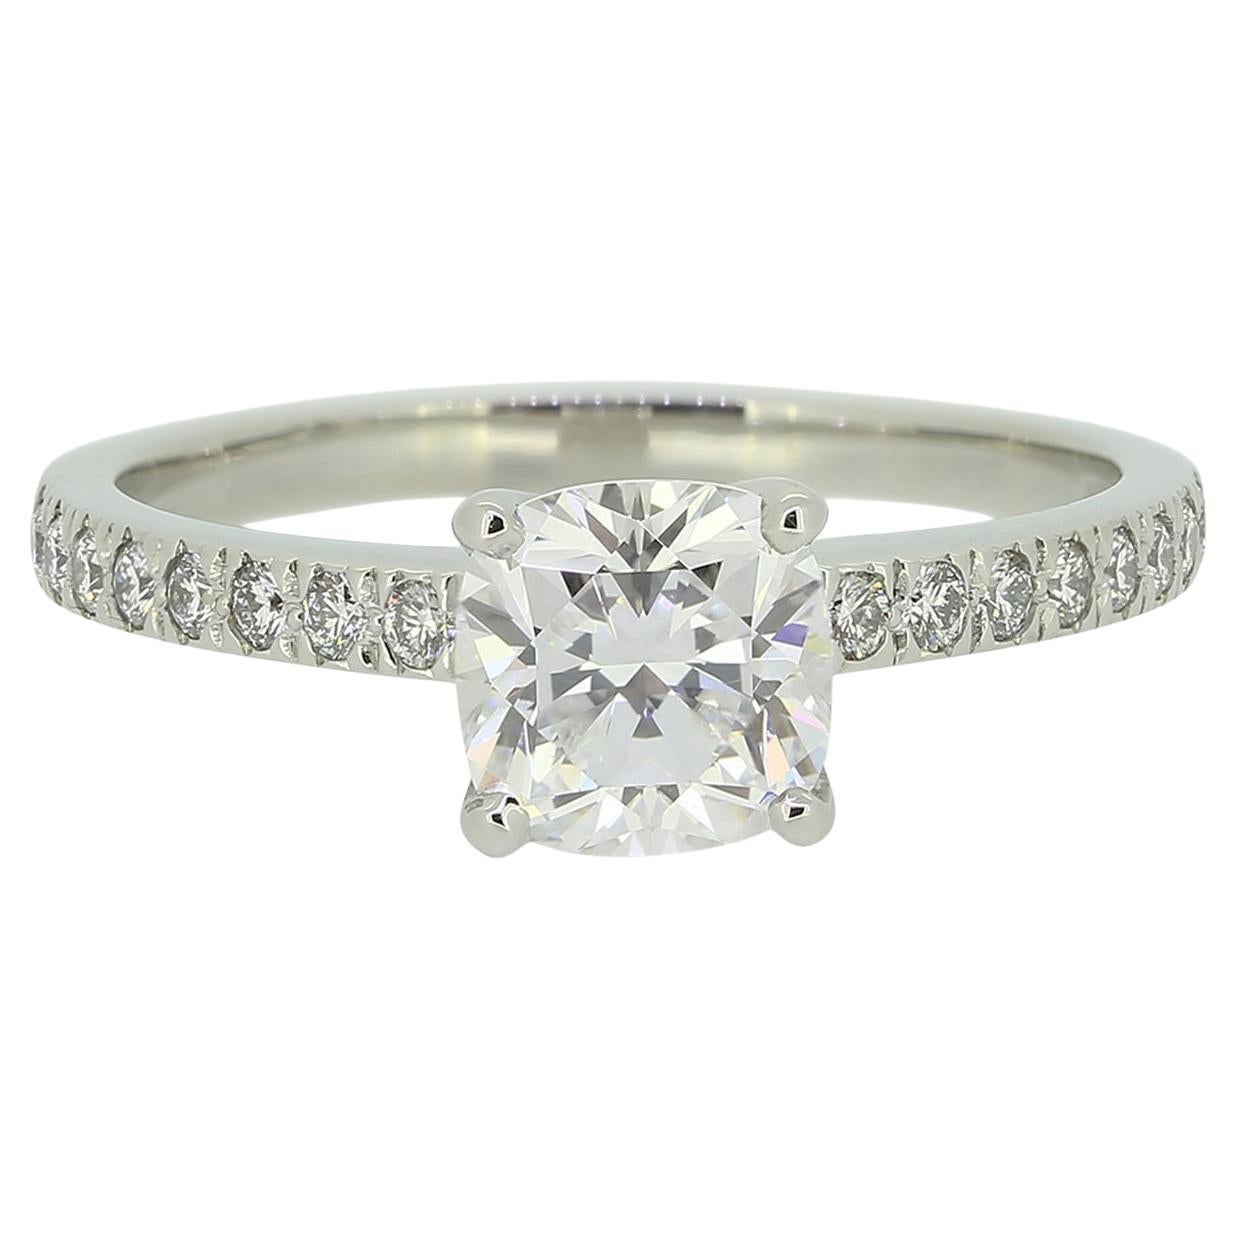 Tiffany & Co. 1.04 Carat Diamond Engagement Ring For Sale